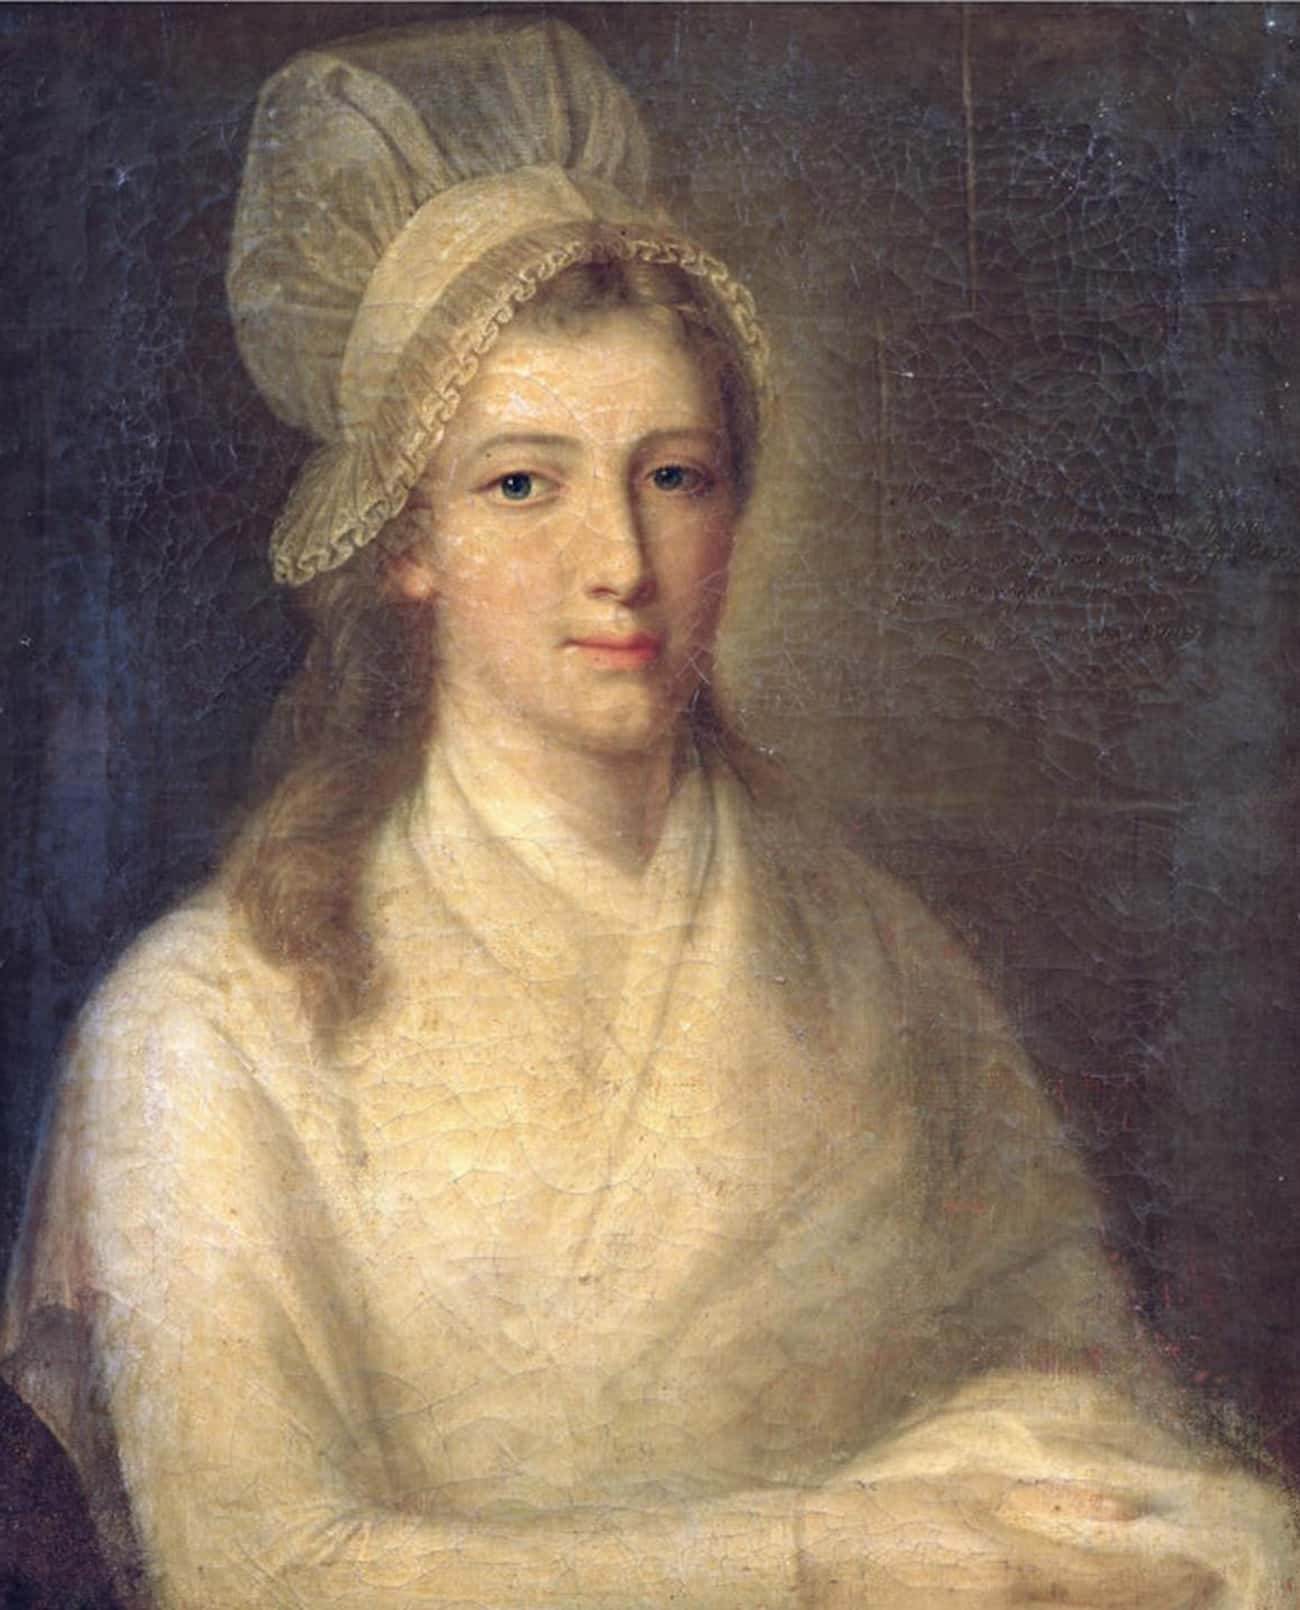 Corday Sat For Her Portrait Hours Before Her Execution